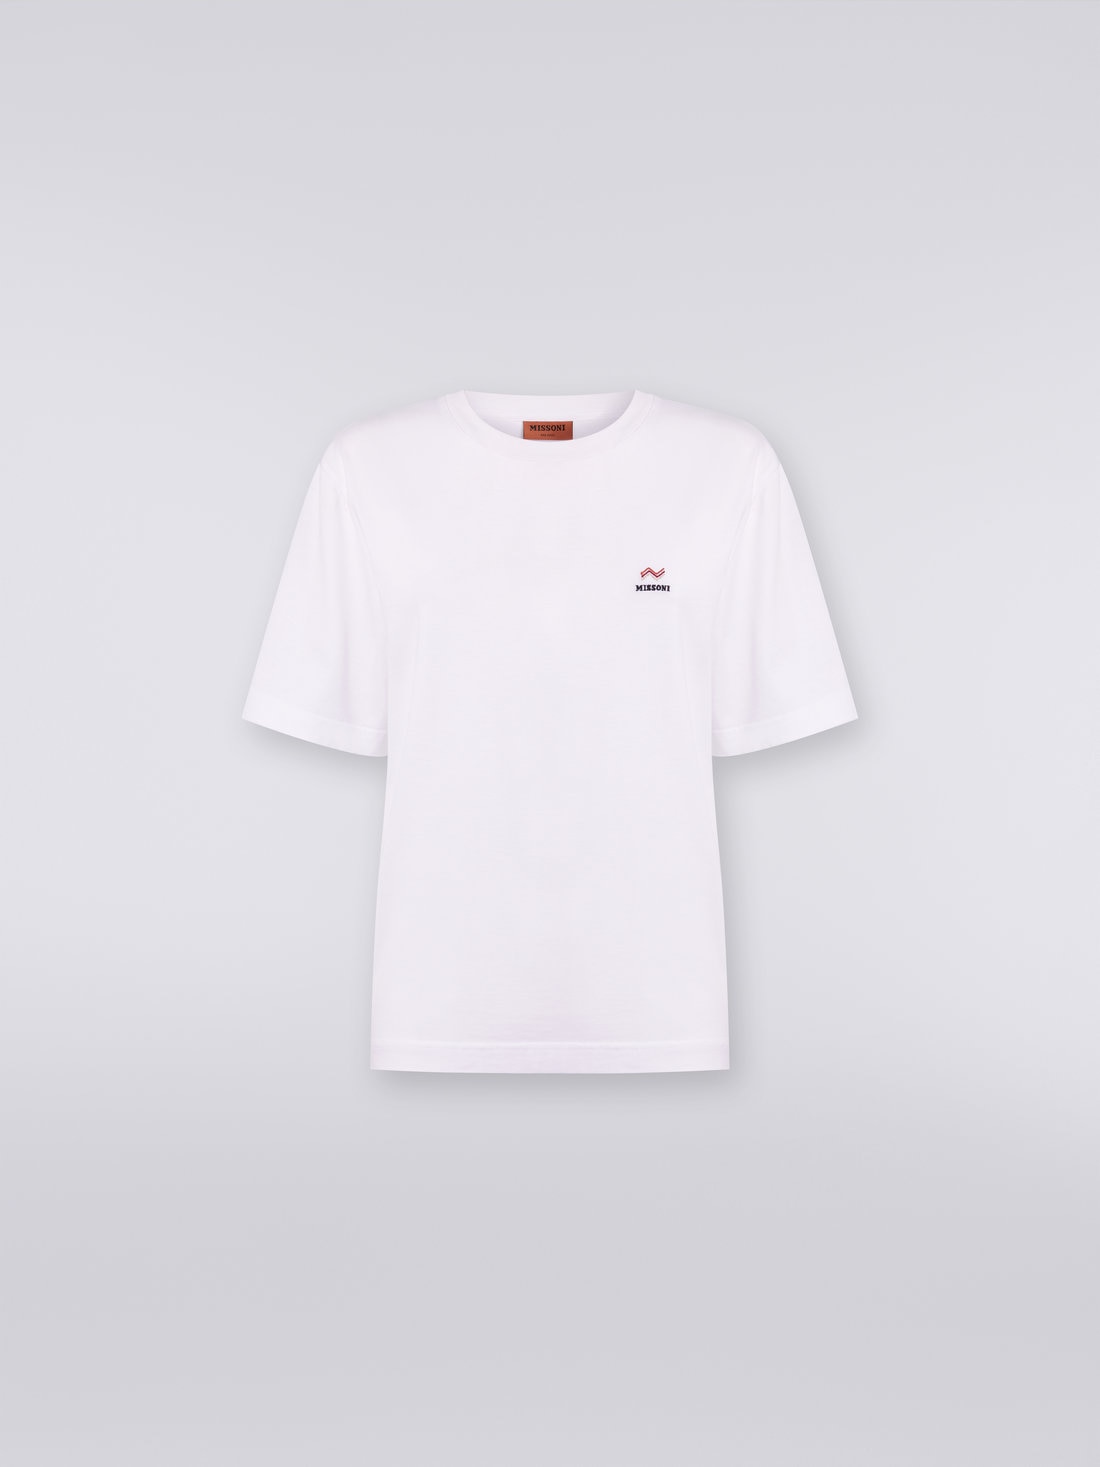 Crew-neck cotton T-shirt with embroidery and logo, White  - DS23WL07BJ00IE14001 - 0